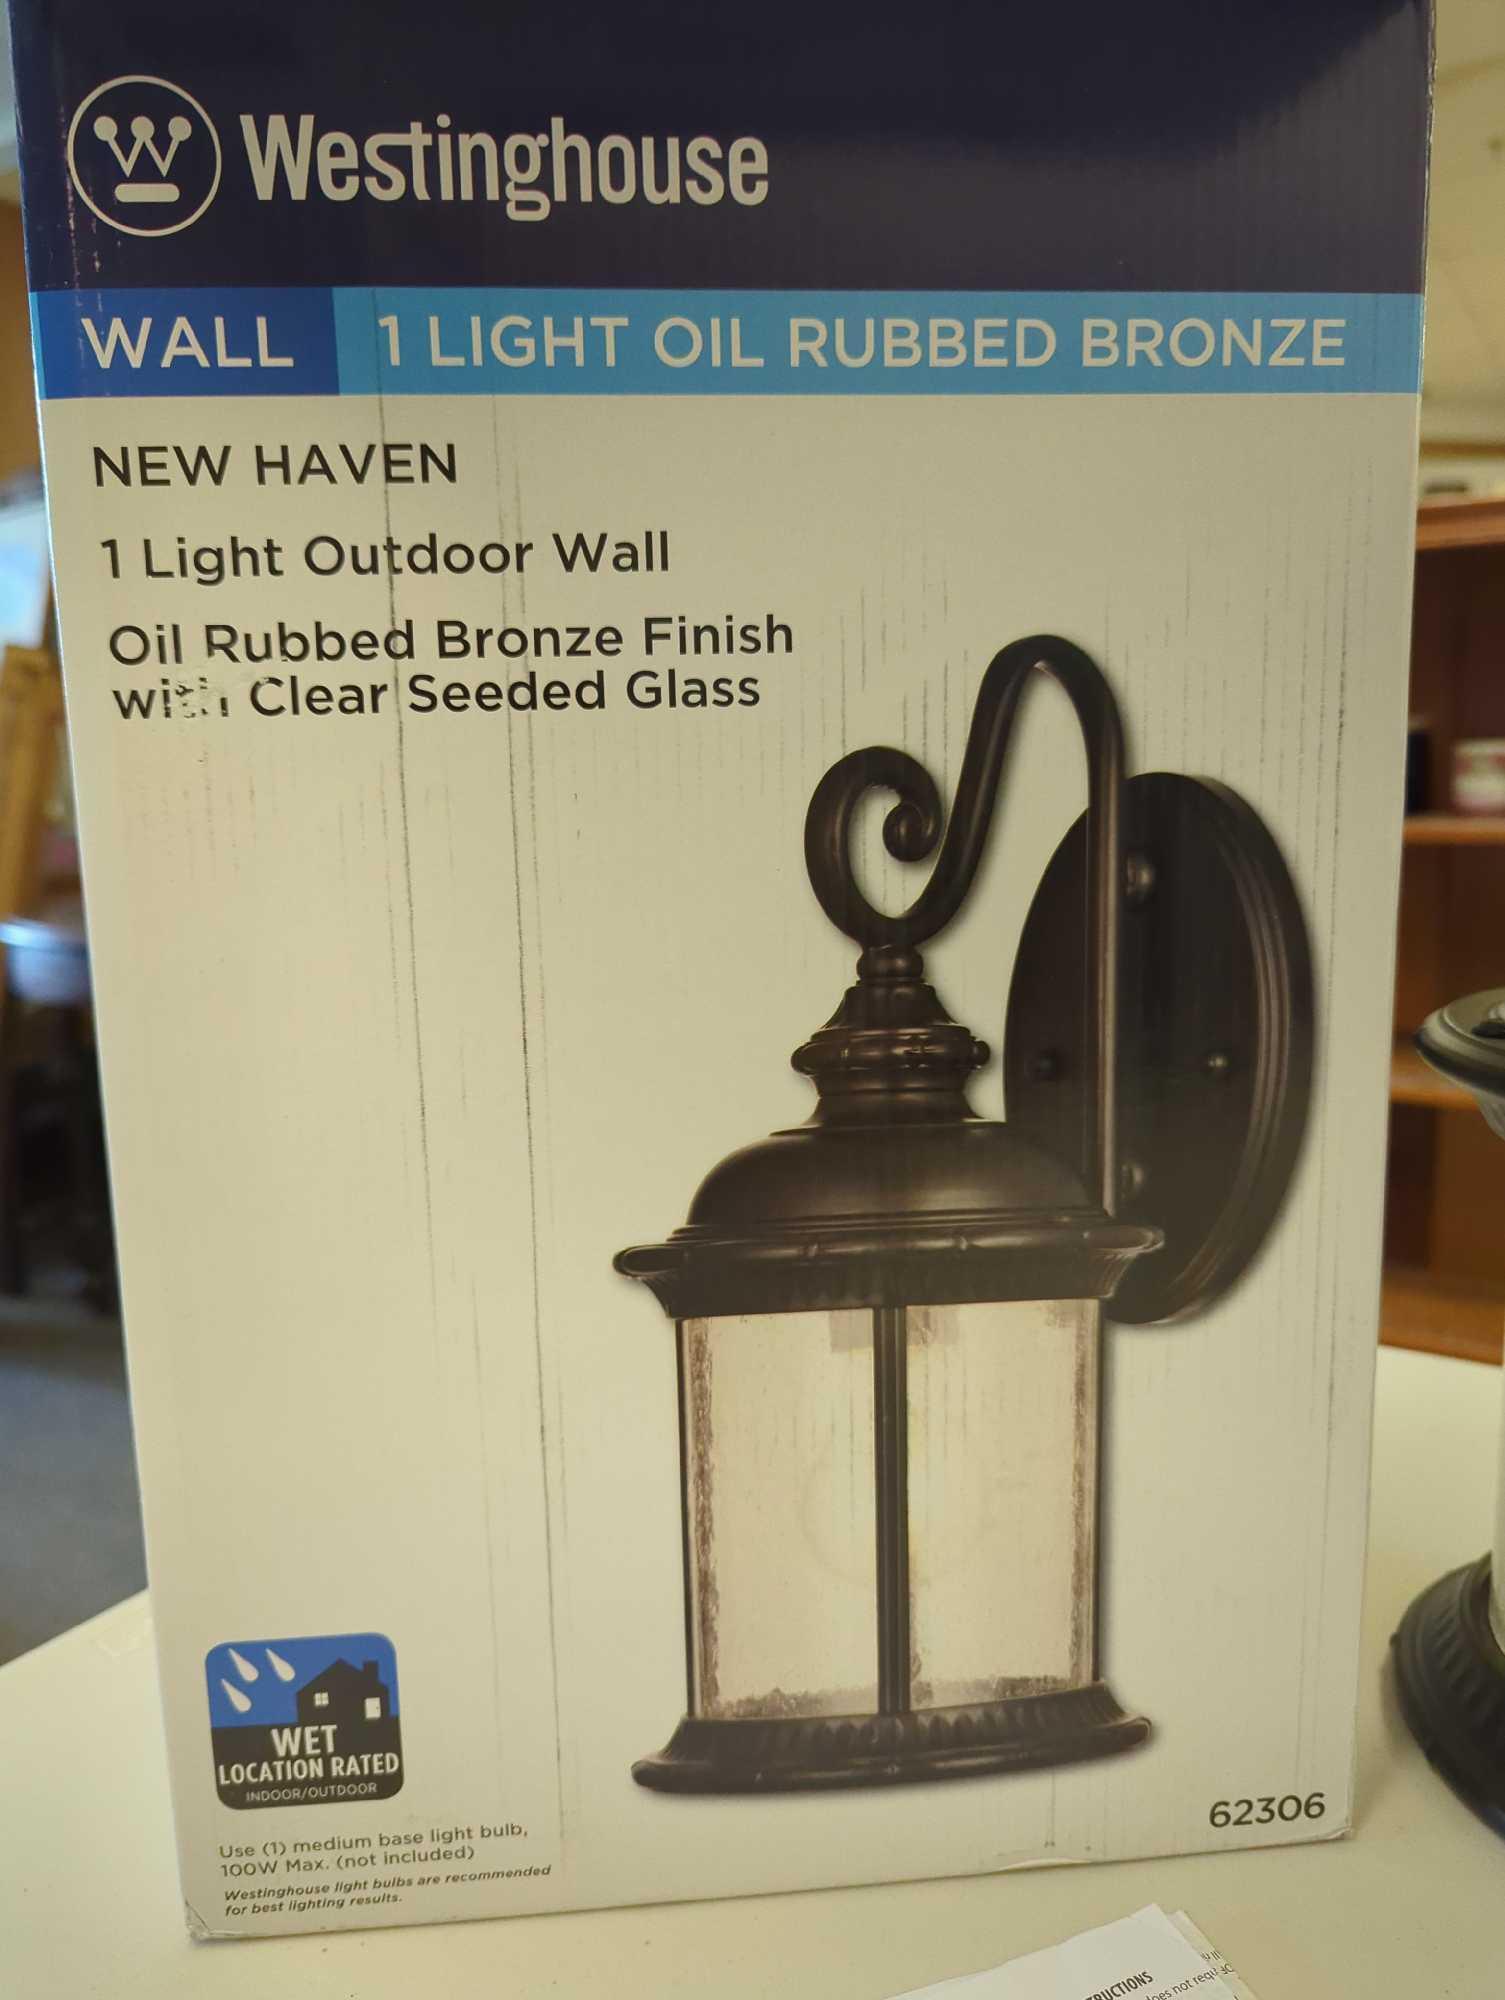 Westinghouse New Haven Wall-Mount 1-Light Outdoor Oil Rubbed Bronze Wall Lantern Sconce. Comes as is